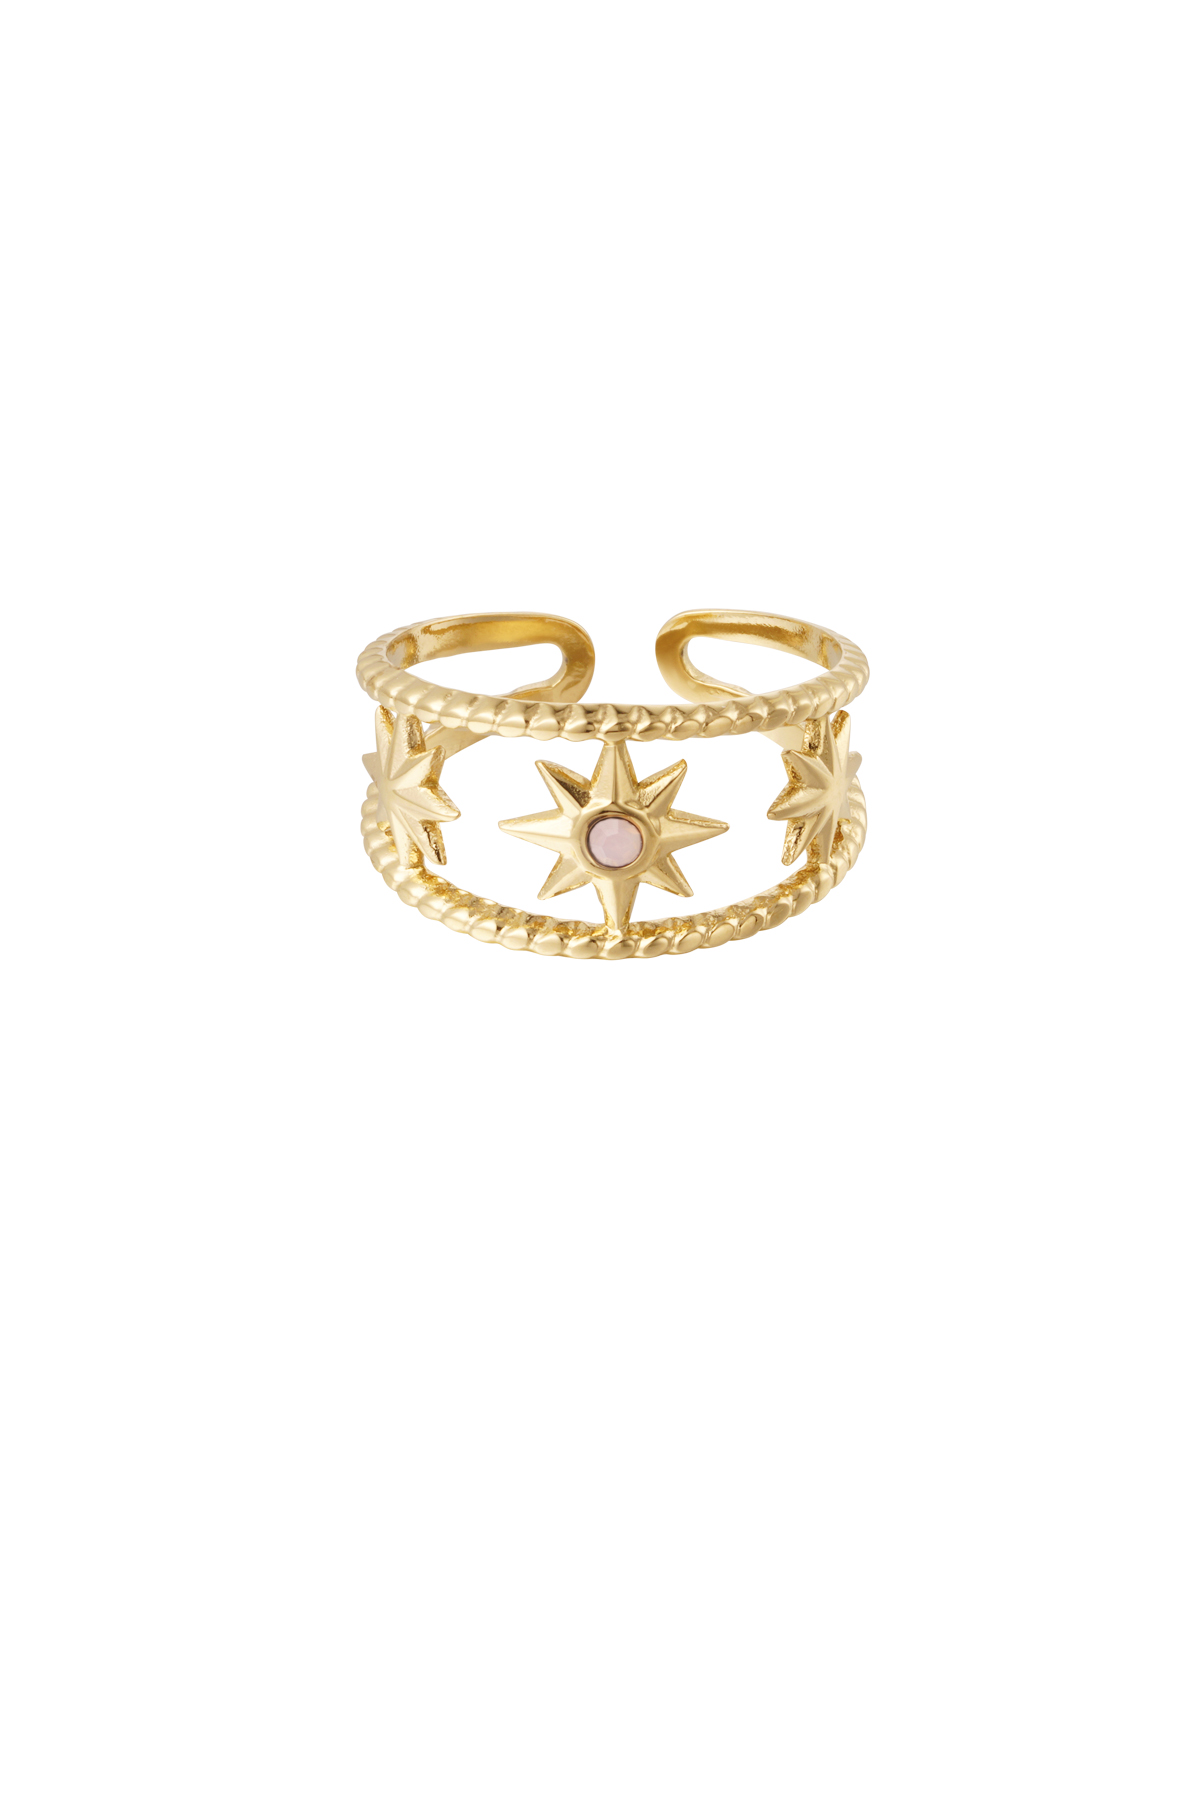 Ring star with pink stone - gold